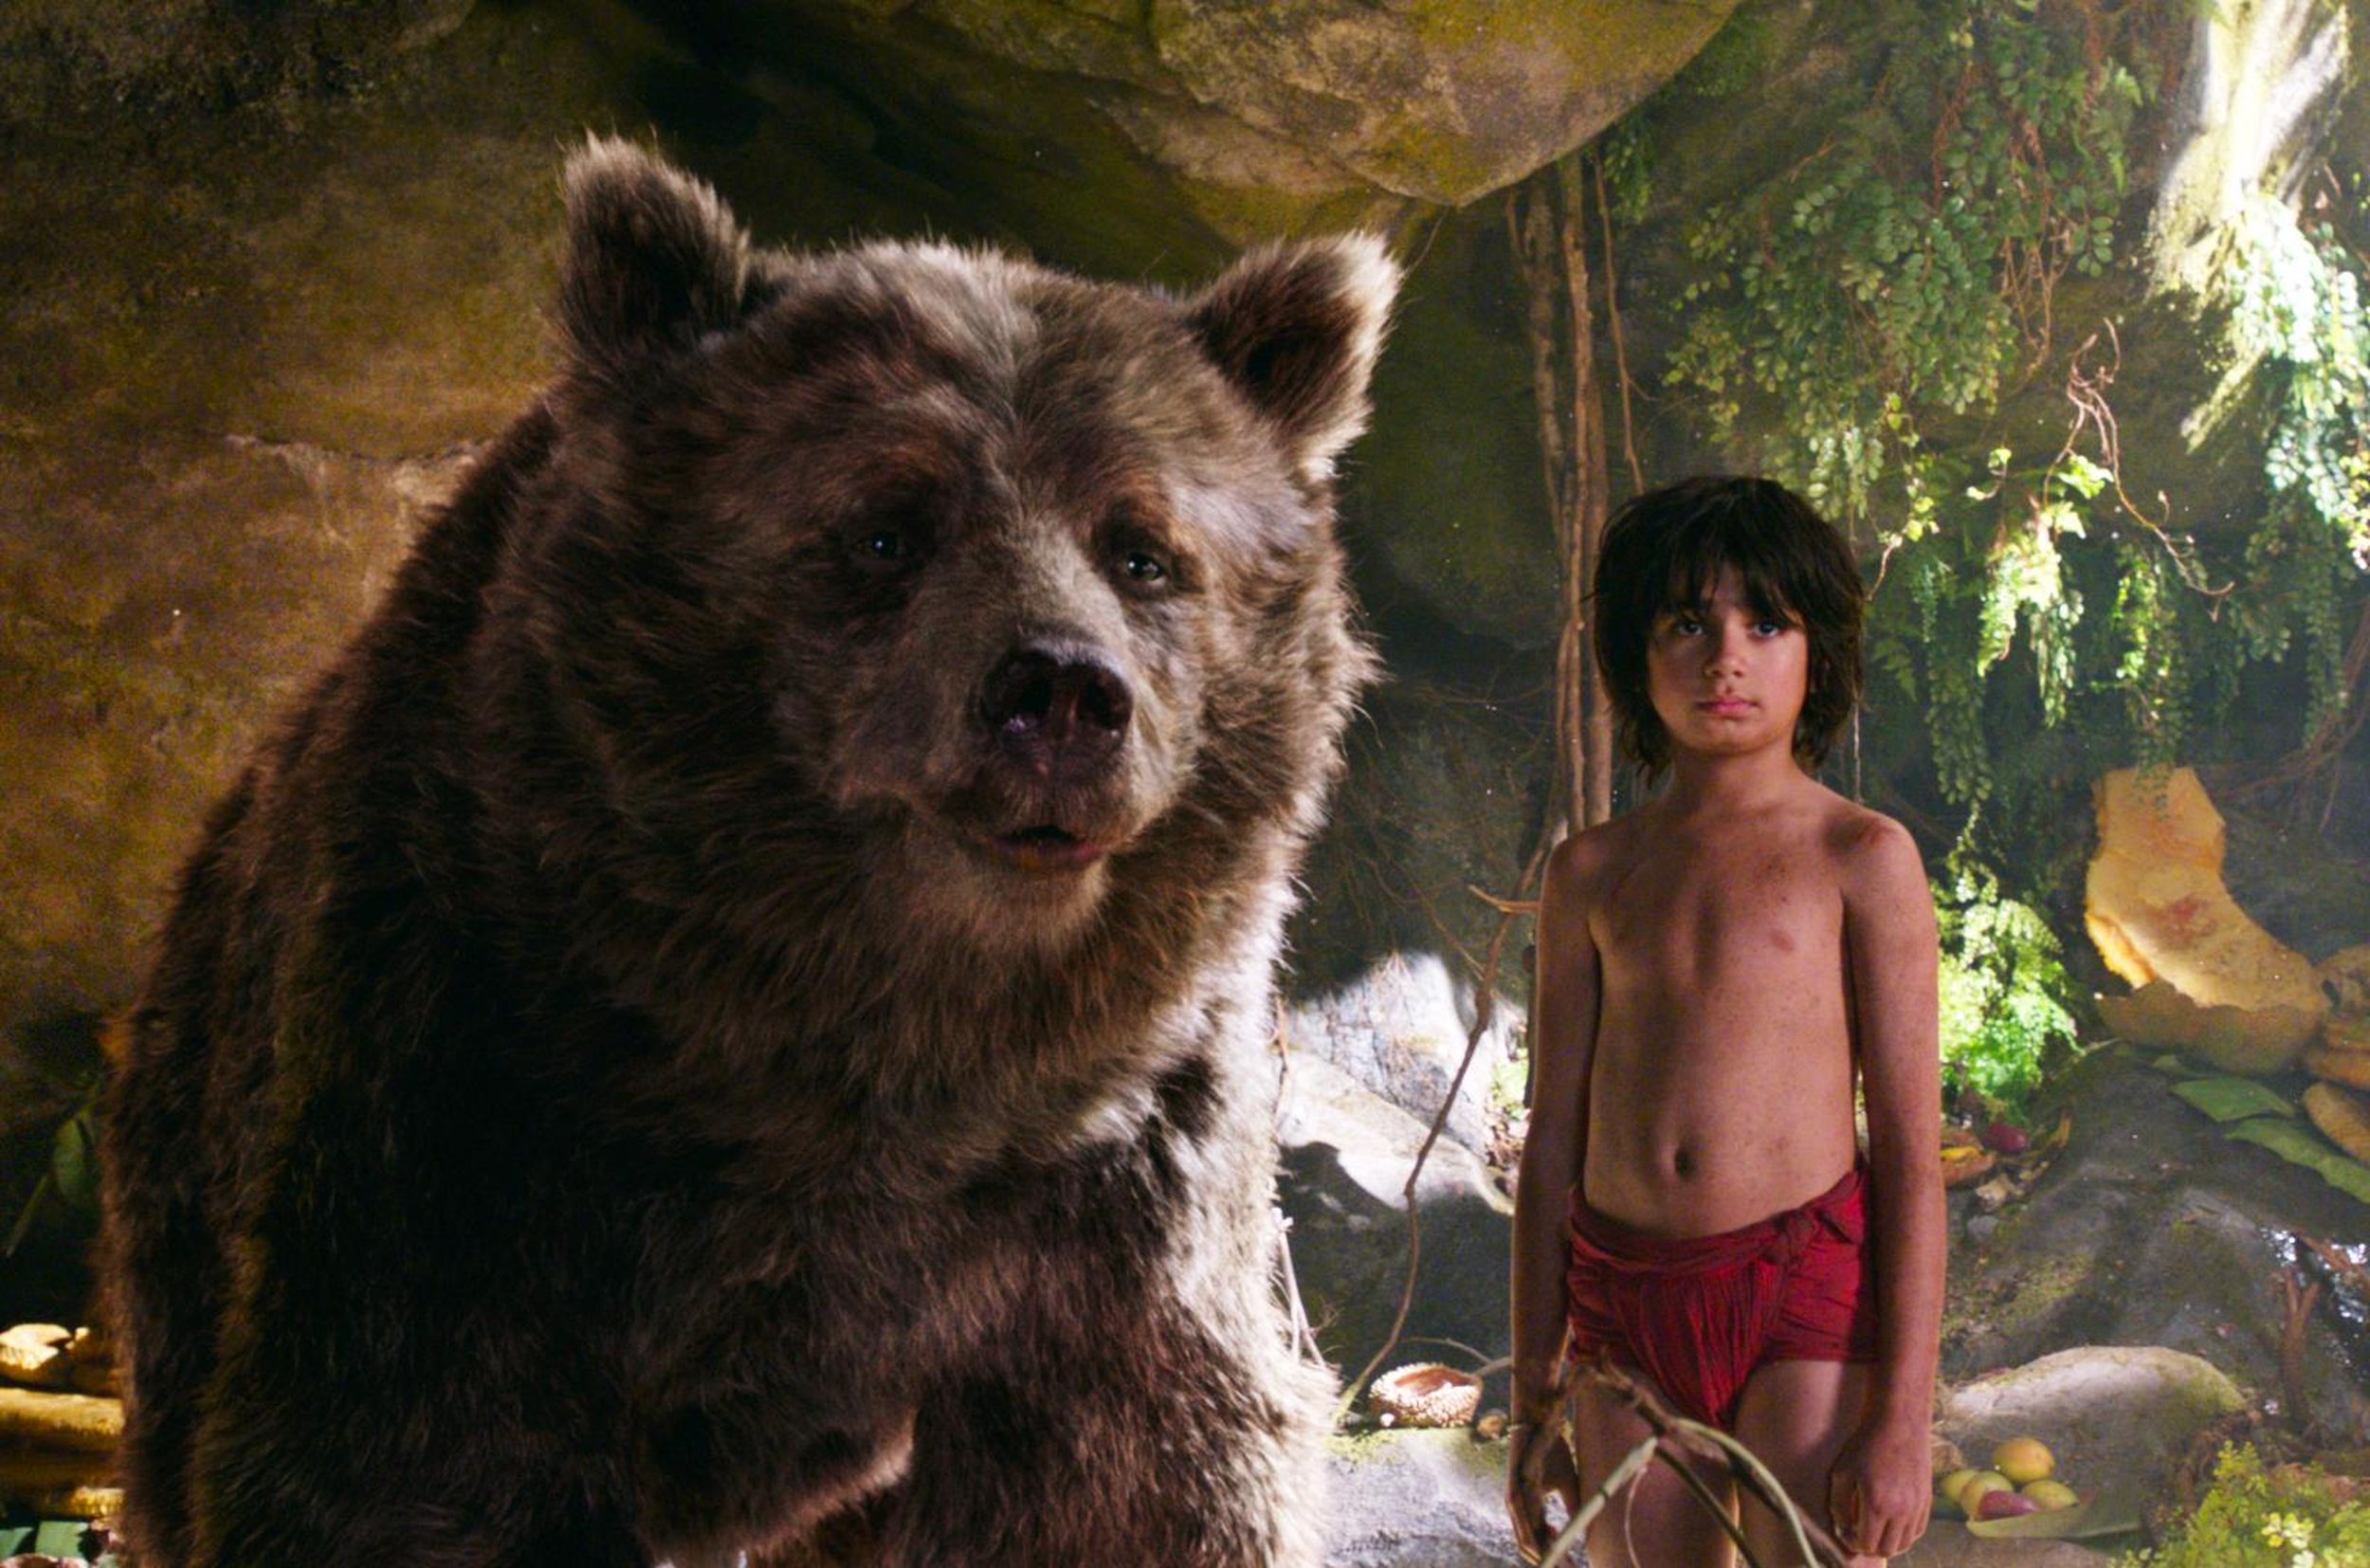 movie review jungle book director